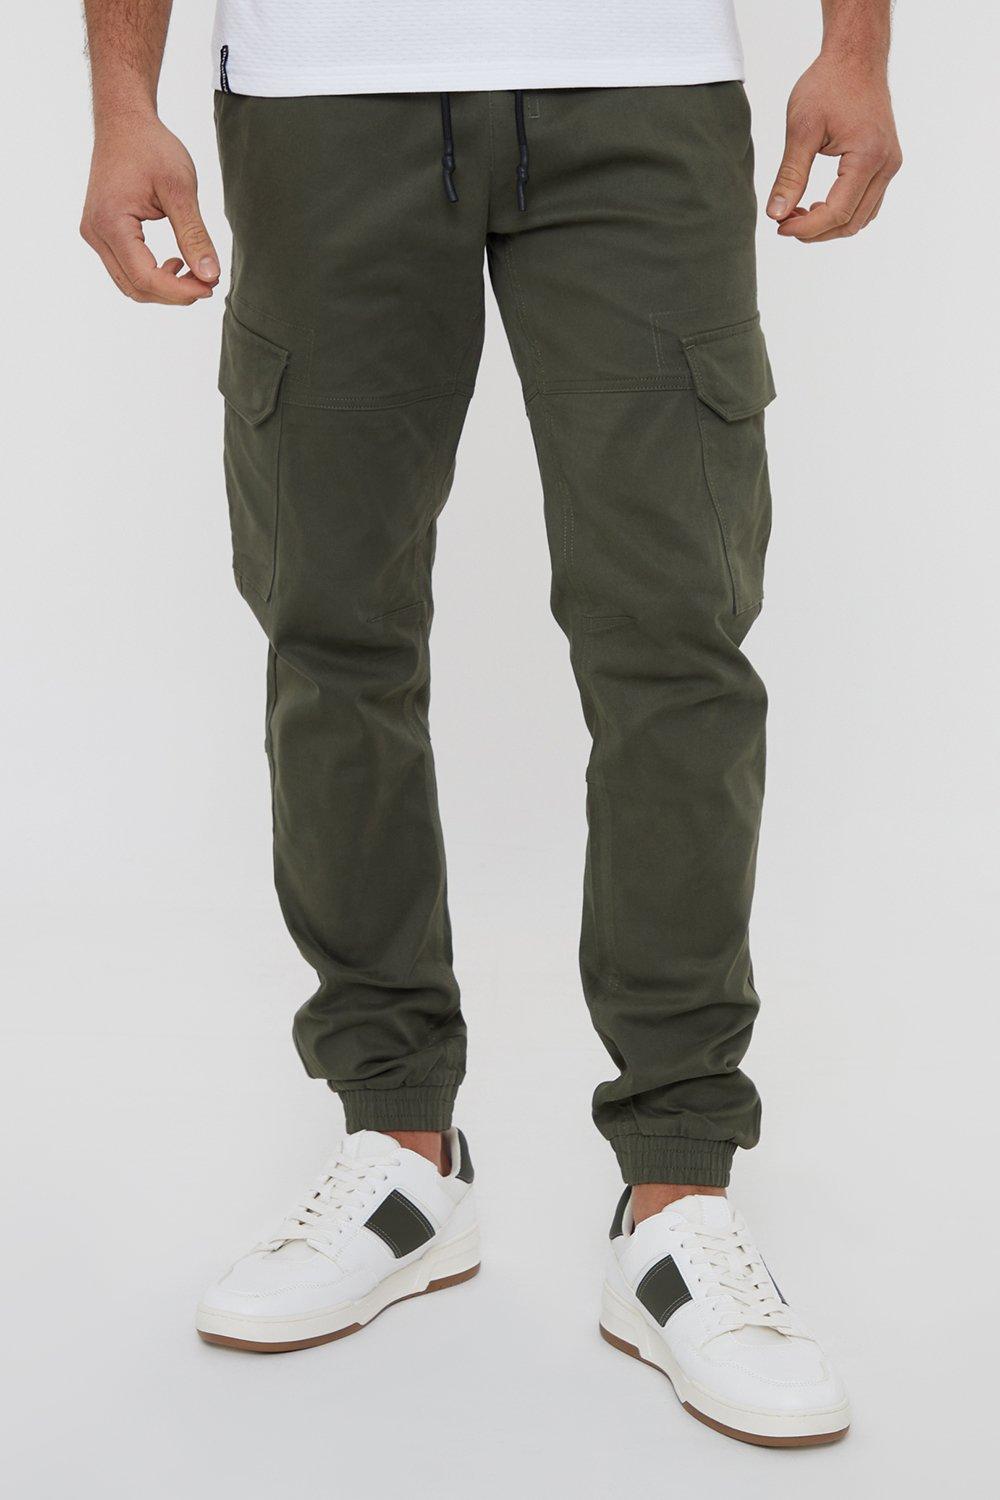 'Belfast' Cotton Jogger Style Cargo Trousers With Stretch